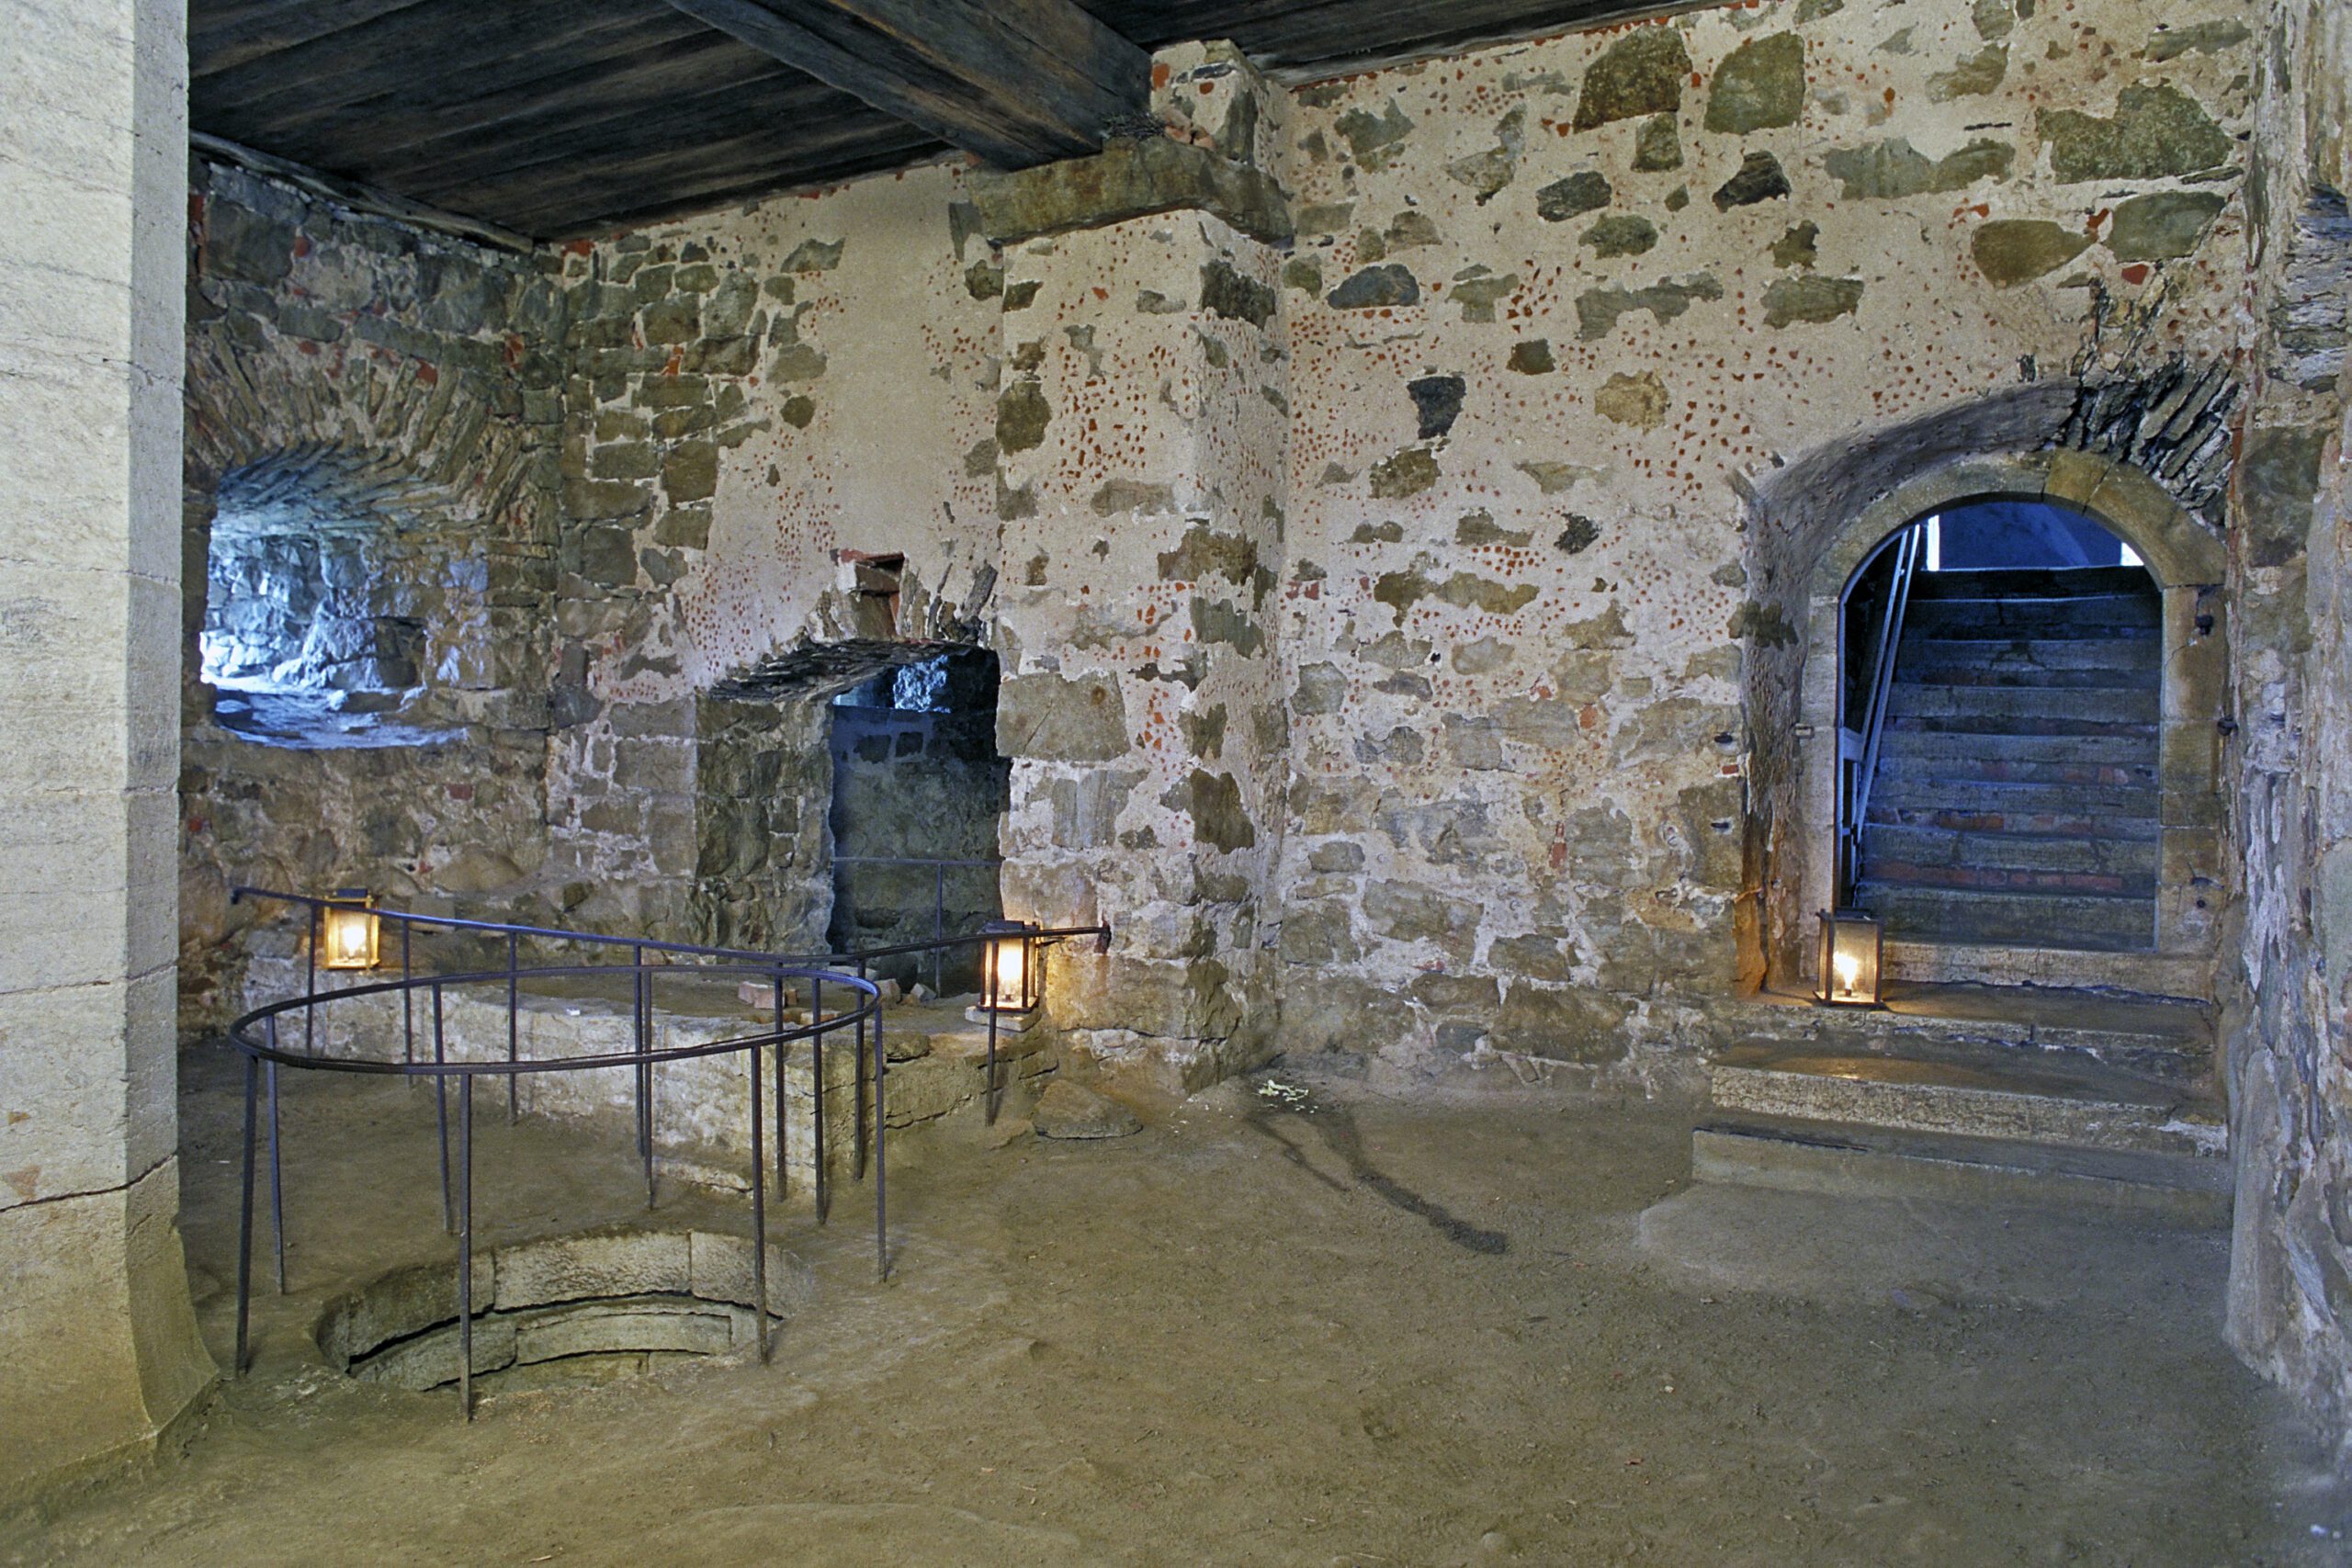 Here you can see the kitchen cellar with the entrance to the right and well and oven opening to the left.